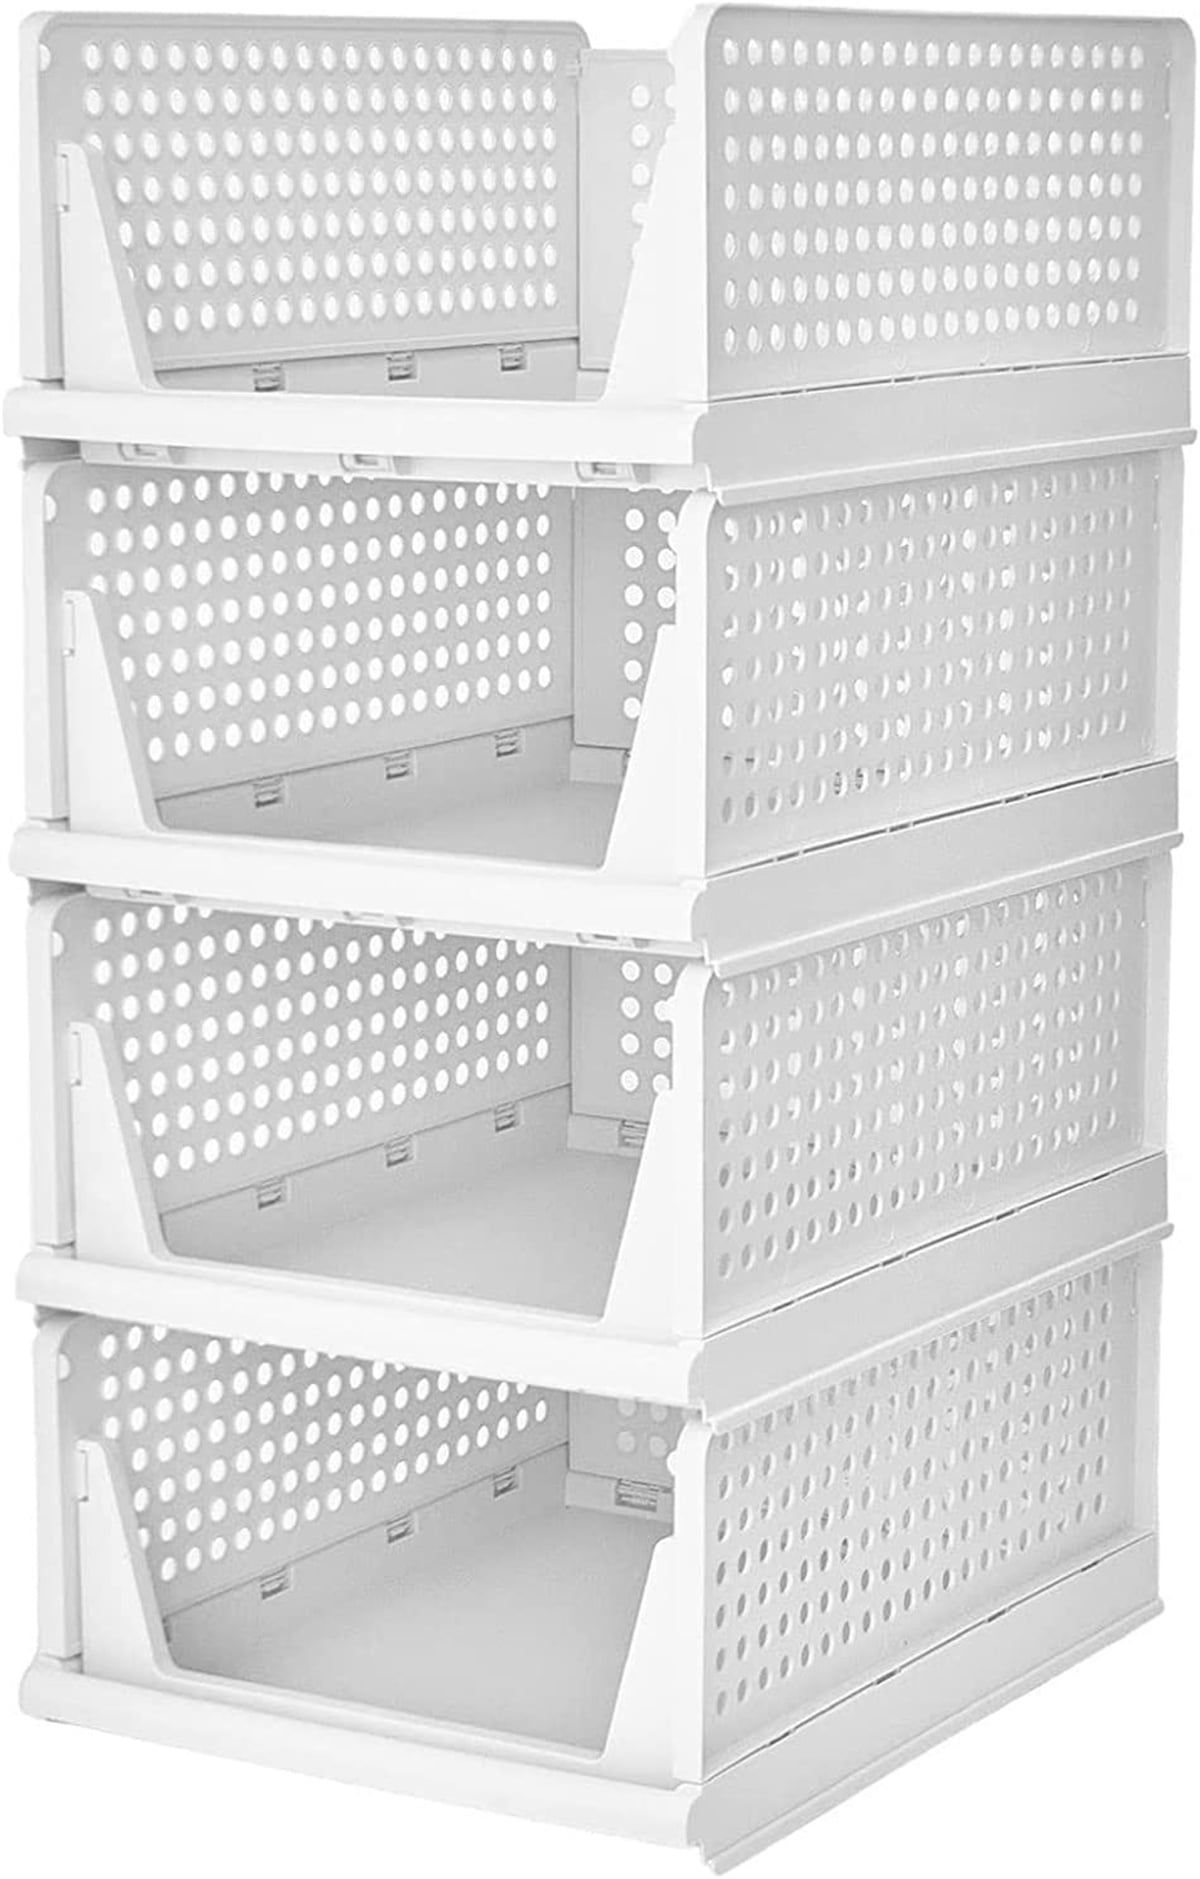 UNZIPE 2 Pack Closet Storage Bins with Handle, Plastic Storage Baskets Organizer Clothes Organizer for Folded Clothes Closet Containers for Shelf